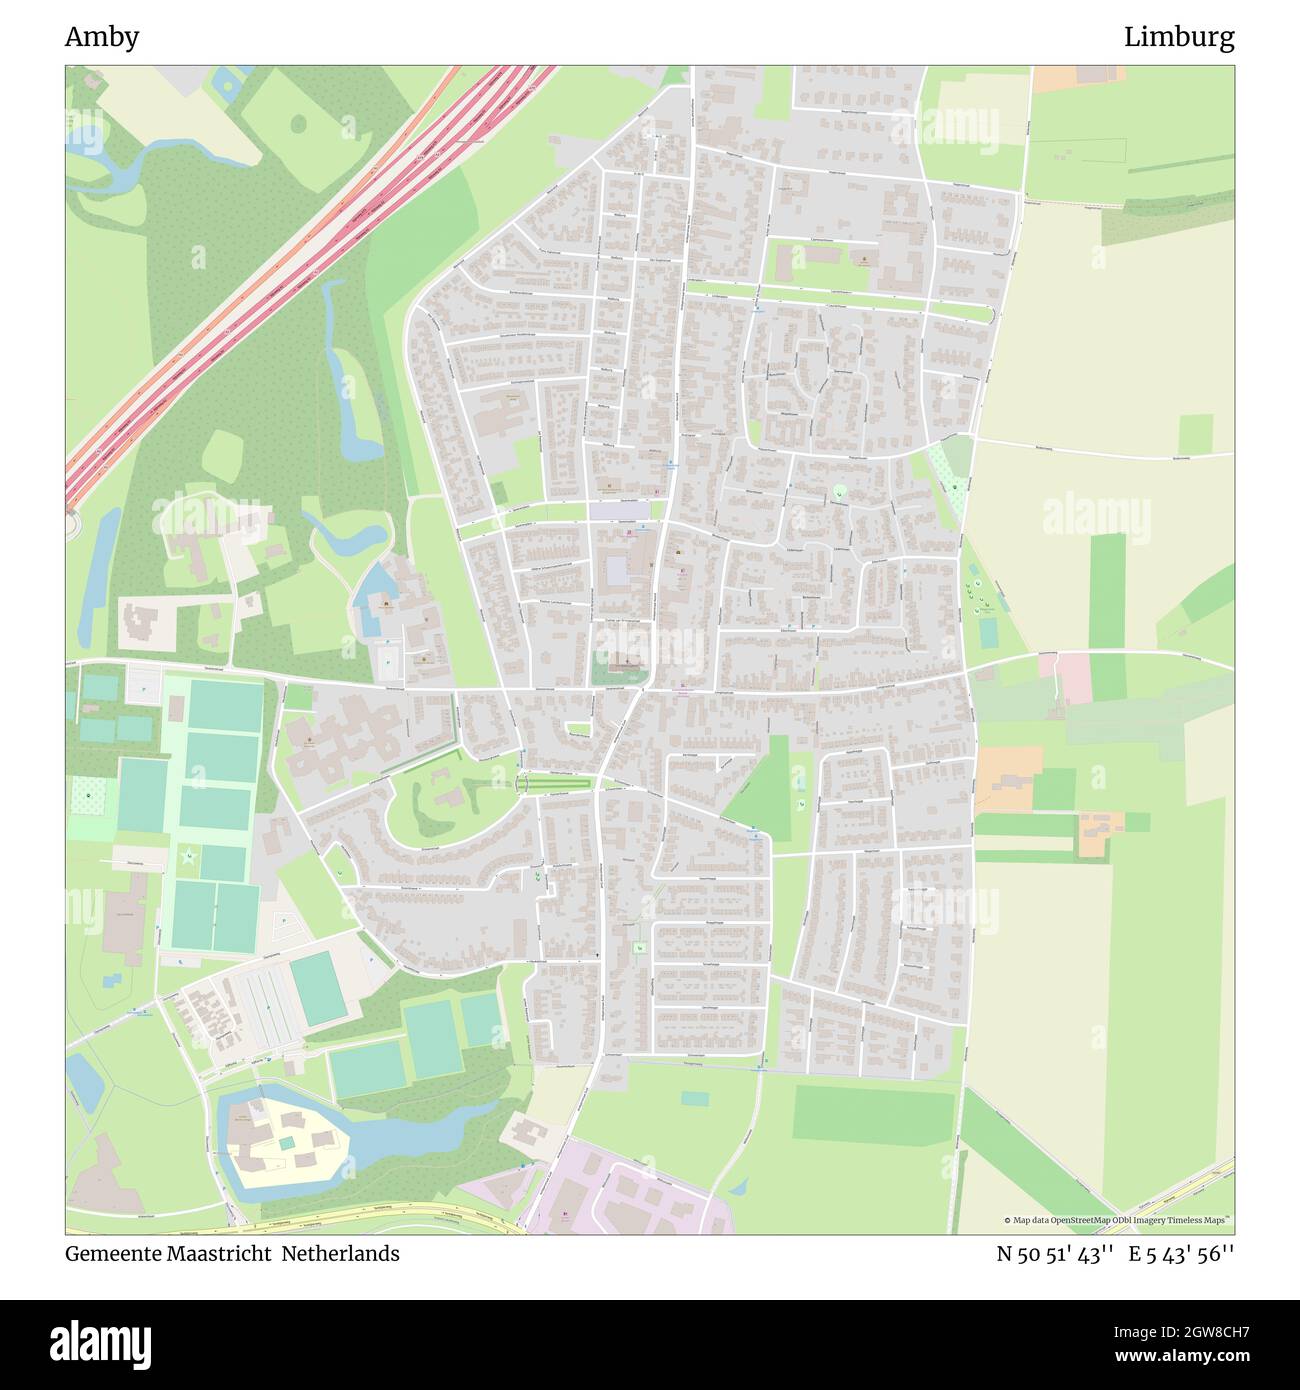 Amby, Gemeente Maastricht, Netherlands, Limburg, N 50 51' 43'', E 5 43' 56'', map, Timeless Map published in 2021. Travelers, explorers and adventurers like Florence Nightingale, David Livingstone, Ernest Shackleton, Lewis and Clark and Sherlock Holmes relied on maps to plan travels to the world's most remote corners, Timeless Maps is mapping most locations on the globe, showing the achievement of great dreams Stock Photo